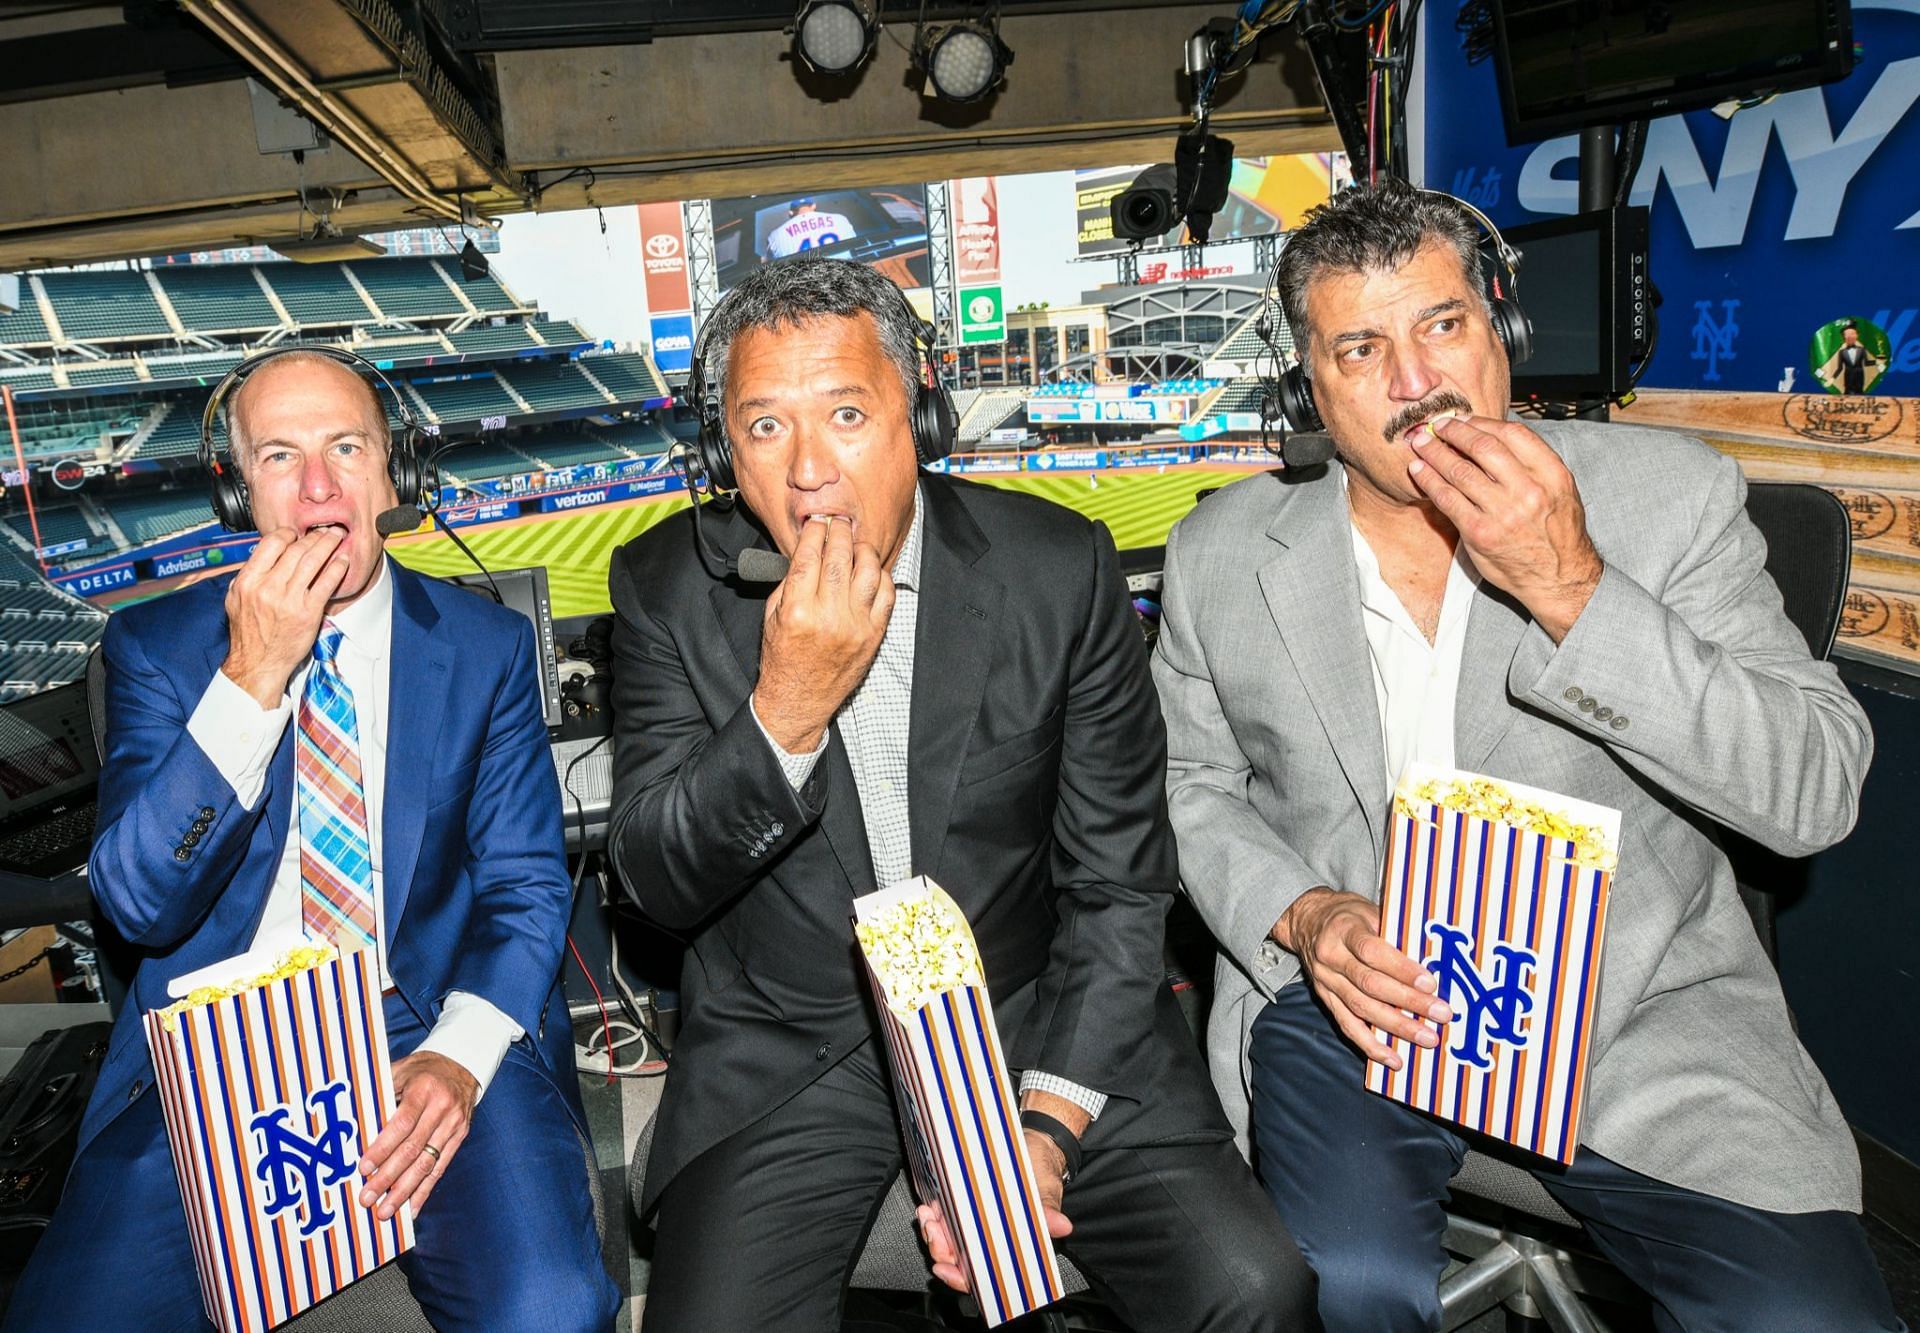 From left to right: Gary Cohen, Ron Darlin, and Keith Hernandez of SNY